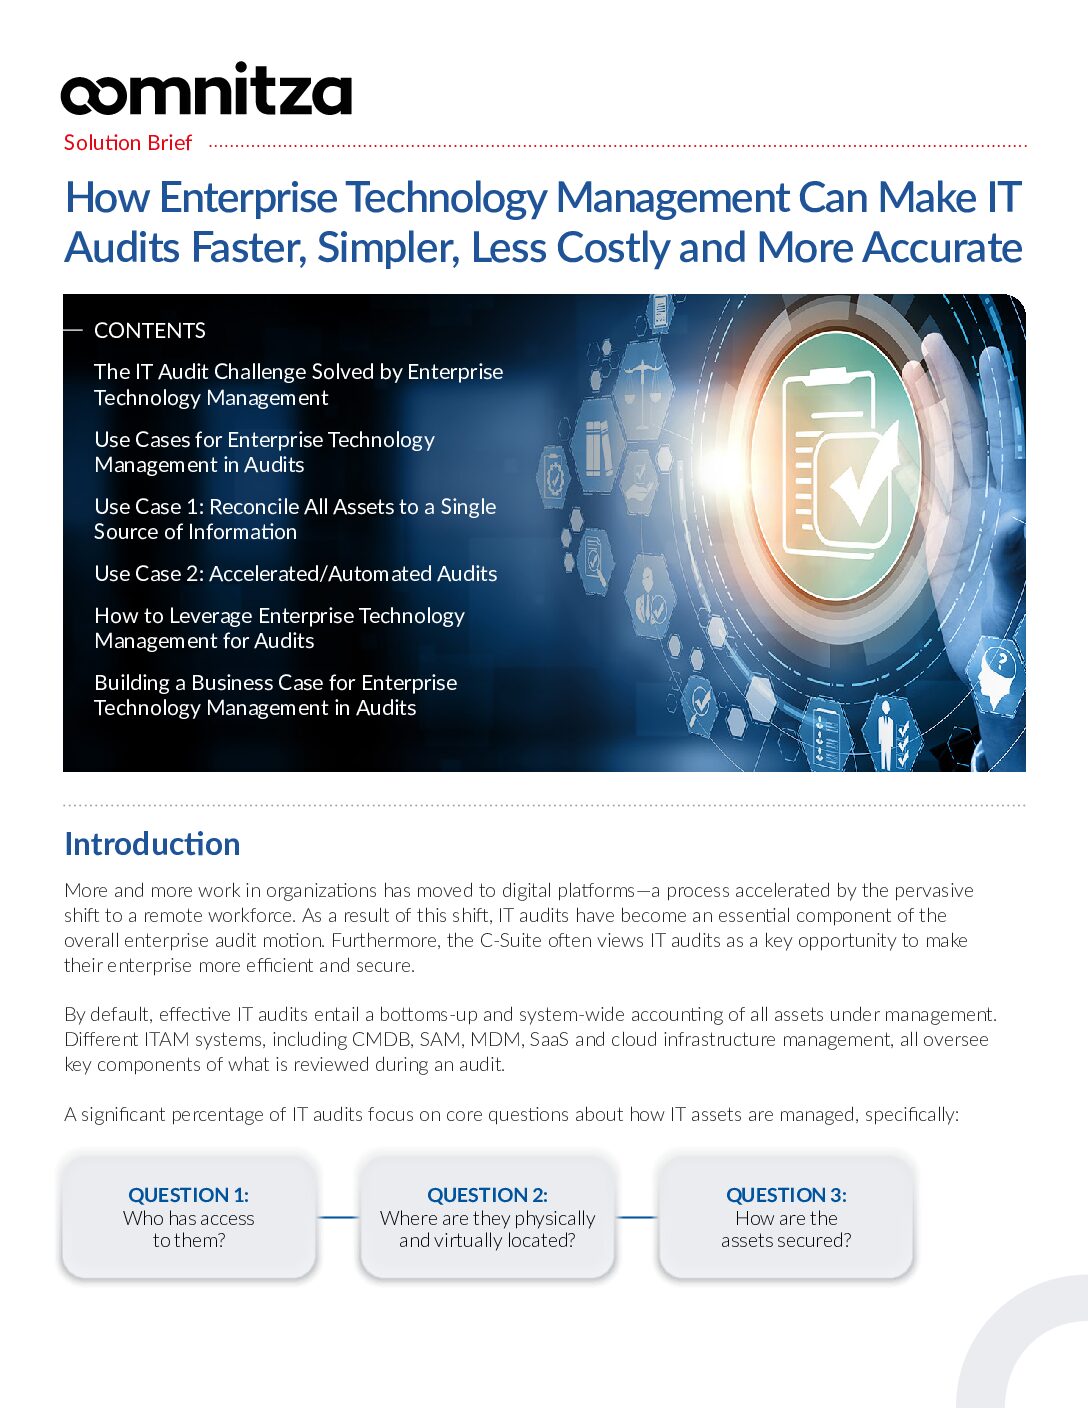 Featured image for How Enterprise Technology Management Can Make IT Audits Faster, Simpler, Less Costly and More Accurate